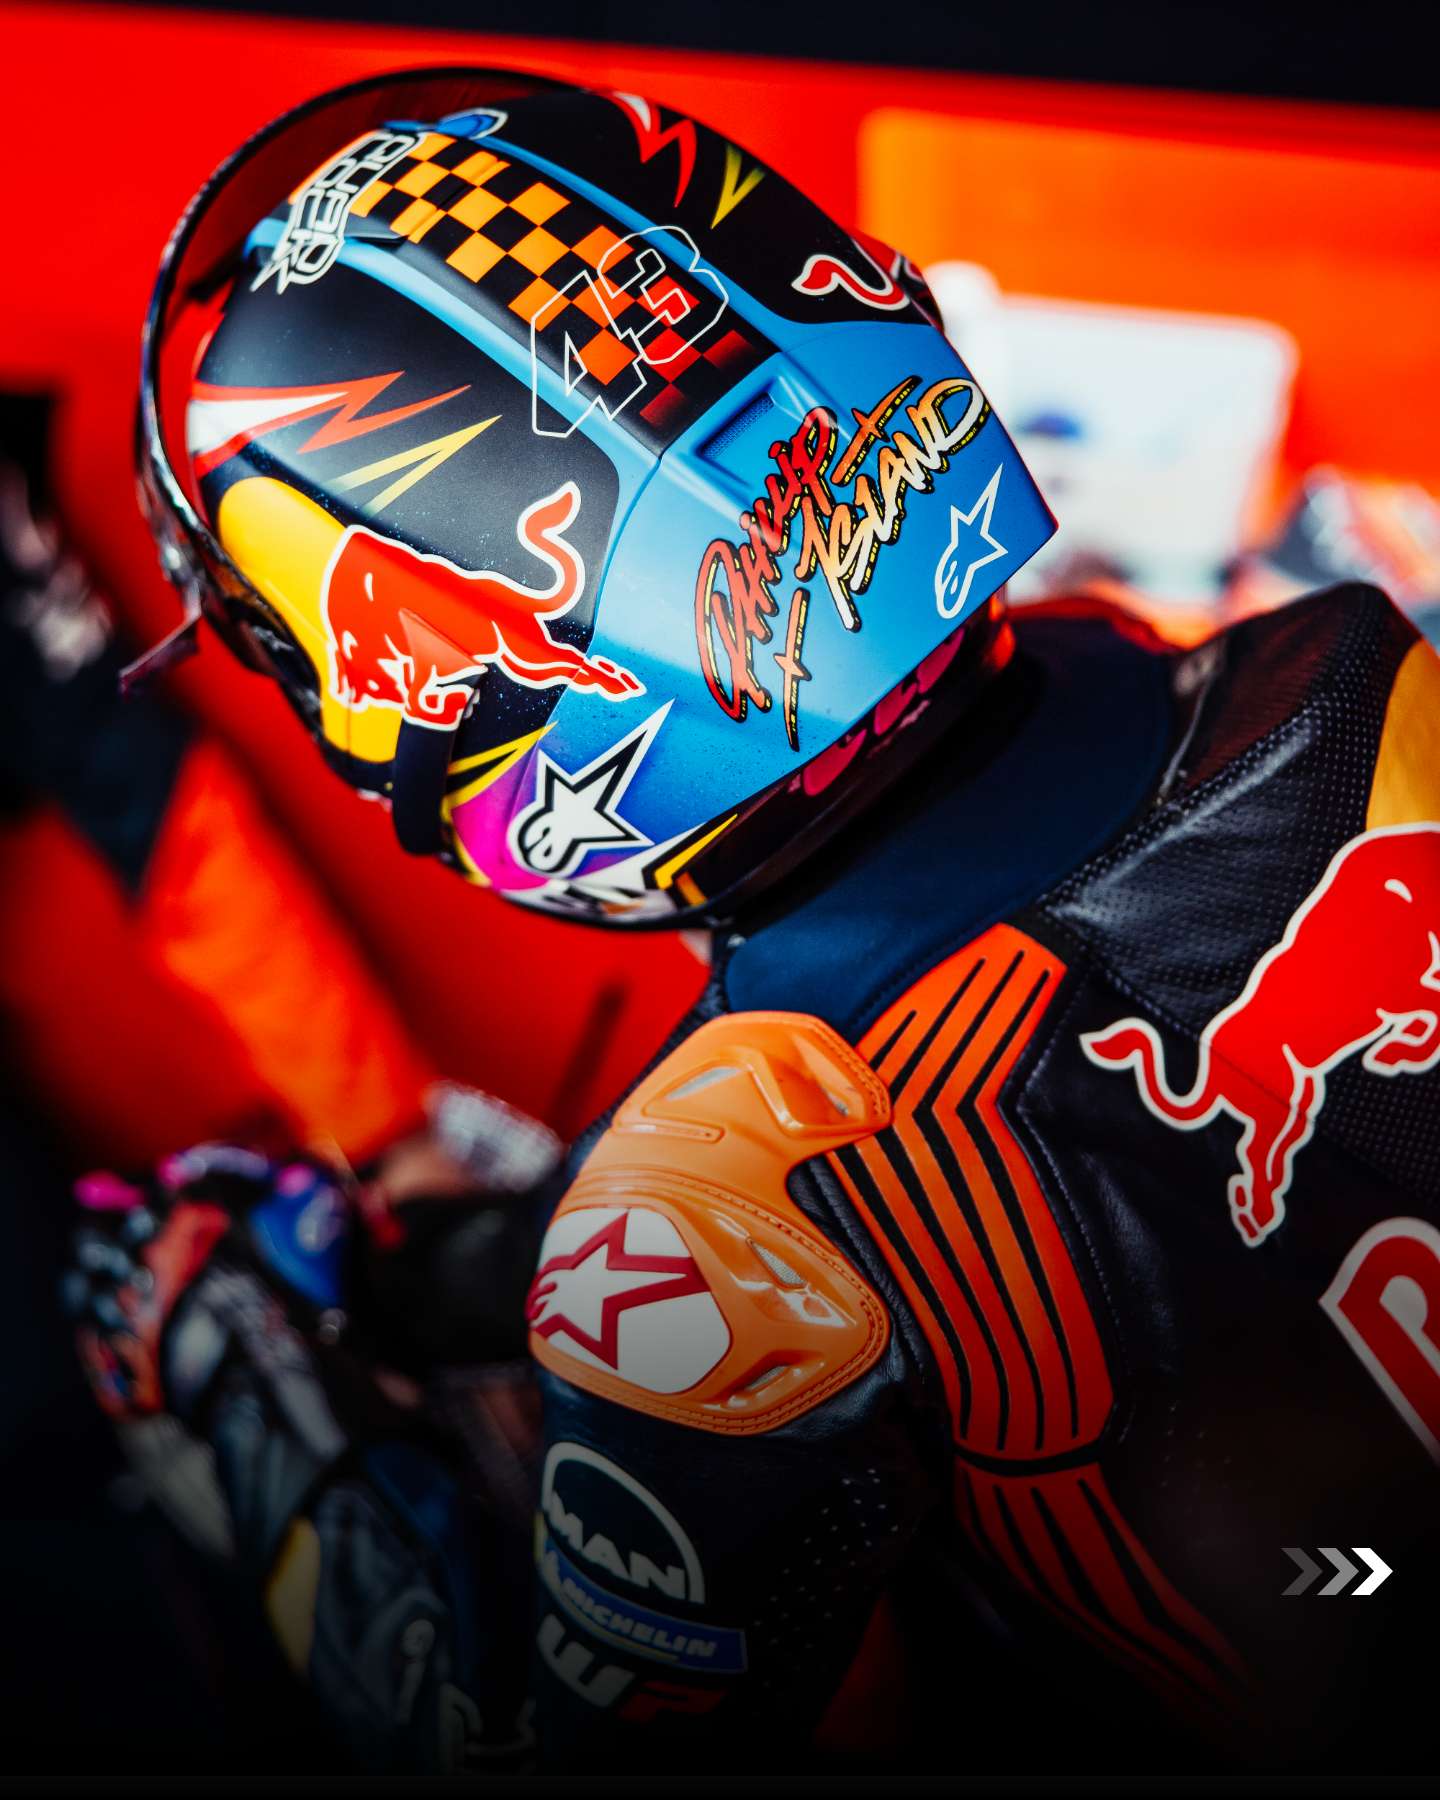 In the lead-up to Jack Miller's home MotoGP at the iconic Phillip Island circuit, Owlpine Group was tasked with creating a dedicated capsule range that supported Jack’s brief of a timeless design and love of vintage motocross wear.